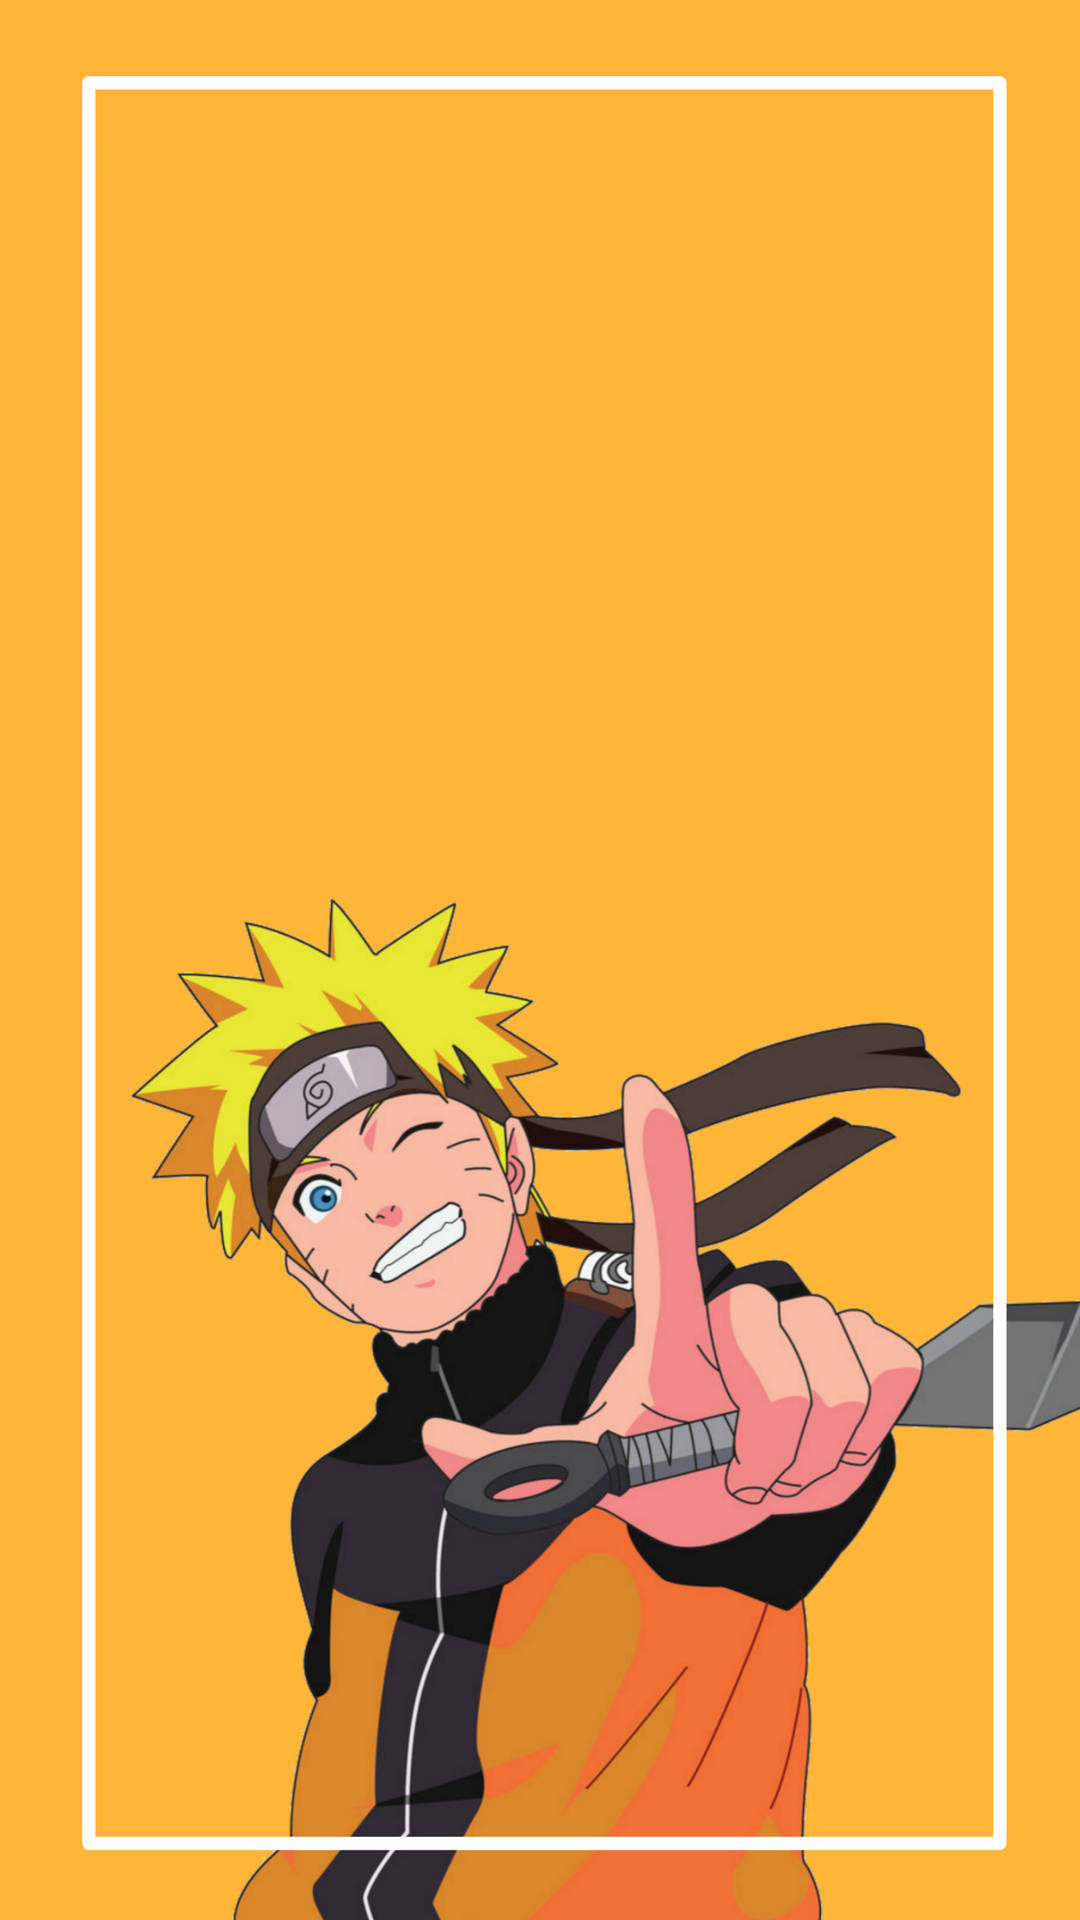 "The Yellow Naruto Ready for His Adventure" Wallpaper